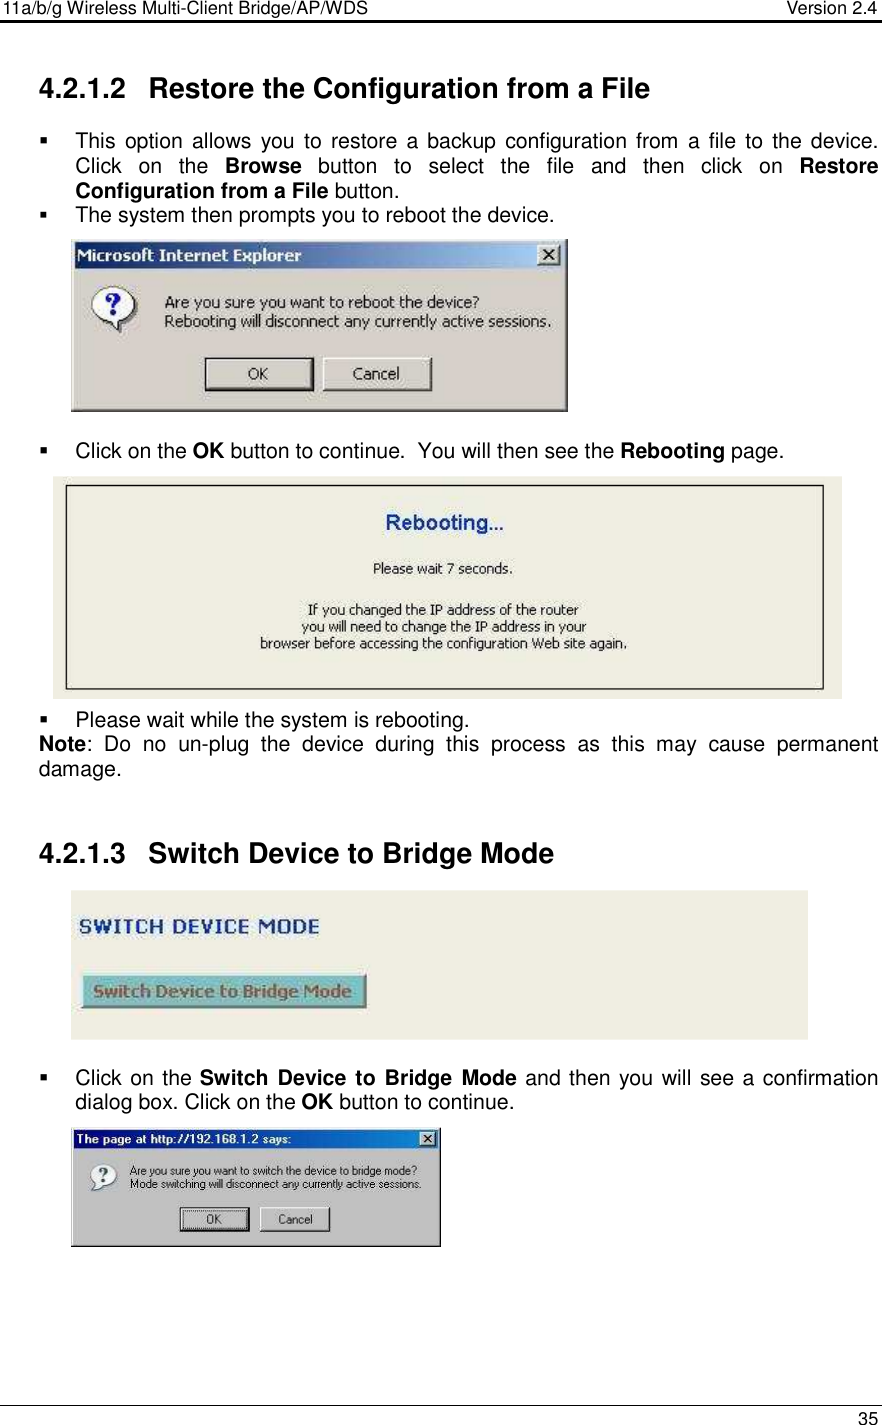 11a/b/g Wireless Multi-Client Bridge/AP/WDS                                  Version 2.4    35  4.2.1.2  Restore the Configuration from a File   This  option allows  you to restore  a  backup configuration from  a file  to the device. Click  on  the  Browse  button  to  select  the  file  and  then  click  on  Restore Configuration from a File button.  The system then prompts you to reboot the device.             Click on the OK button to continue.  You will then see the Rebooting page.              Please wait while the system is rebooting.  Note:  Do  no  un-plug  the  device  during  this  process  as  this  may  cause  permanent damage.    4.2.1.3  Switch Device to Bridge Mode          Click on the Switch Device to Bridge Mode and then you will see a confirmation dialog box. Click on the OK button to continue.      